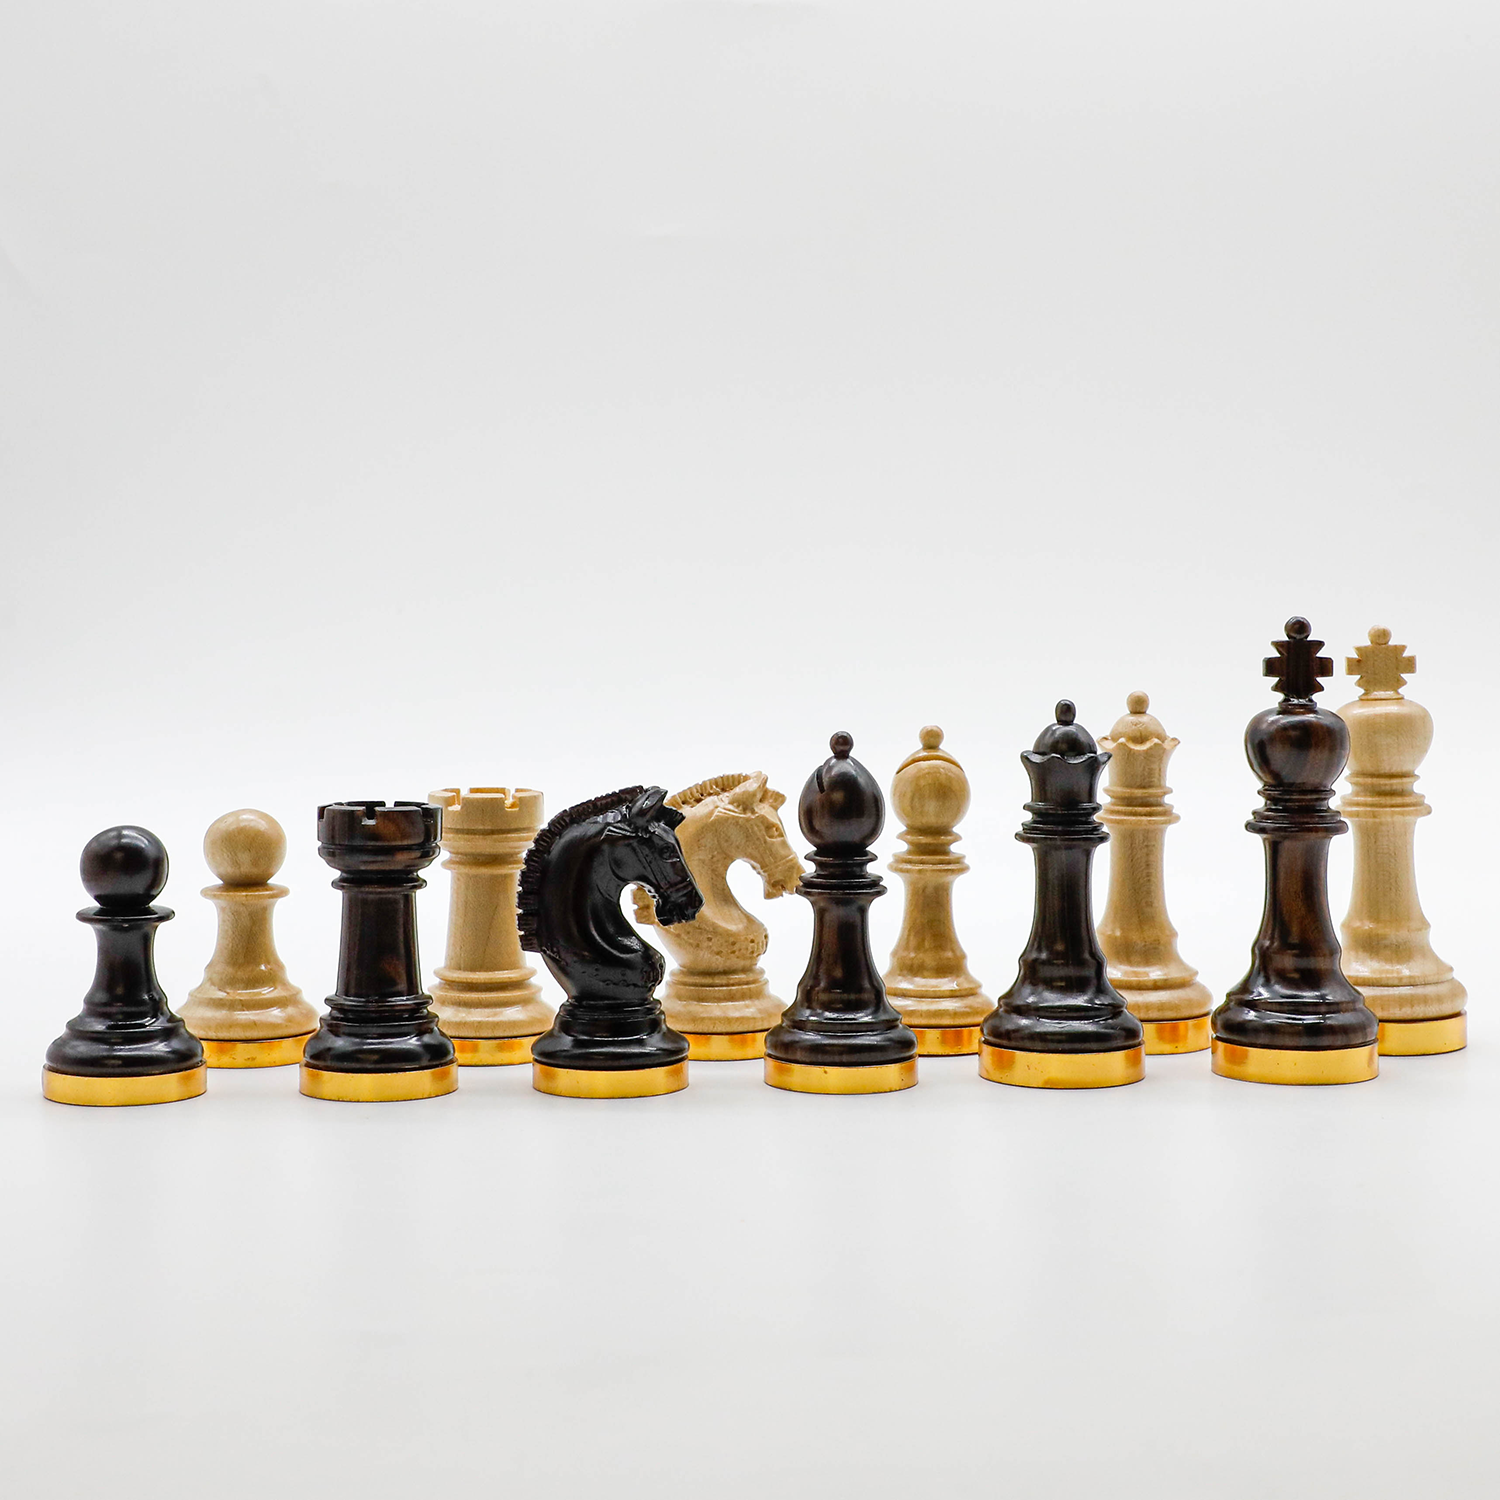 The Unique Ebony & Maple Chess Pieces With Gold-Plated Brass Base